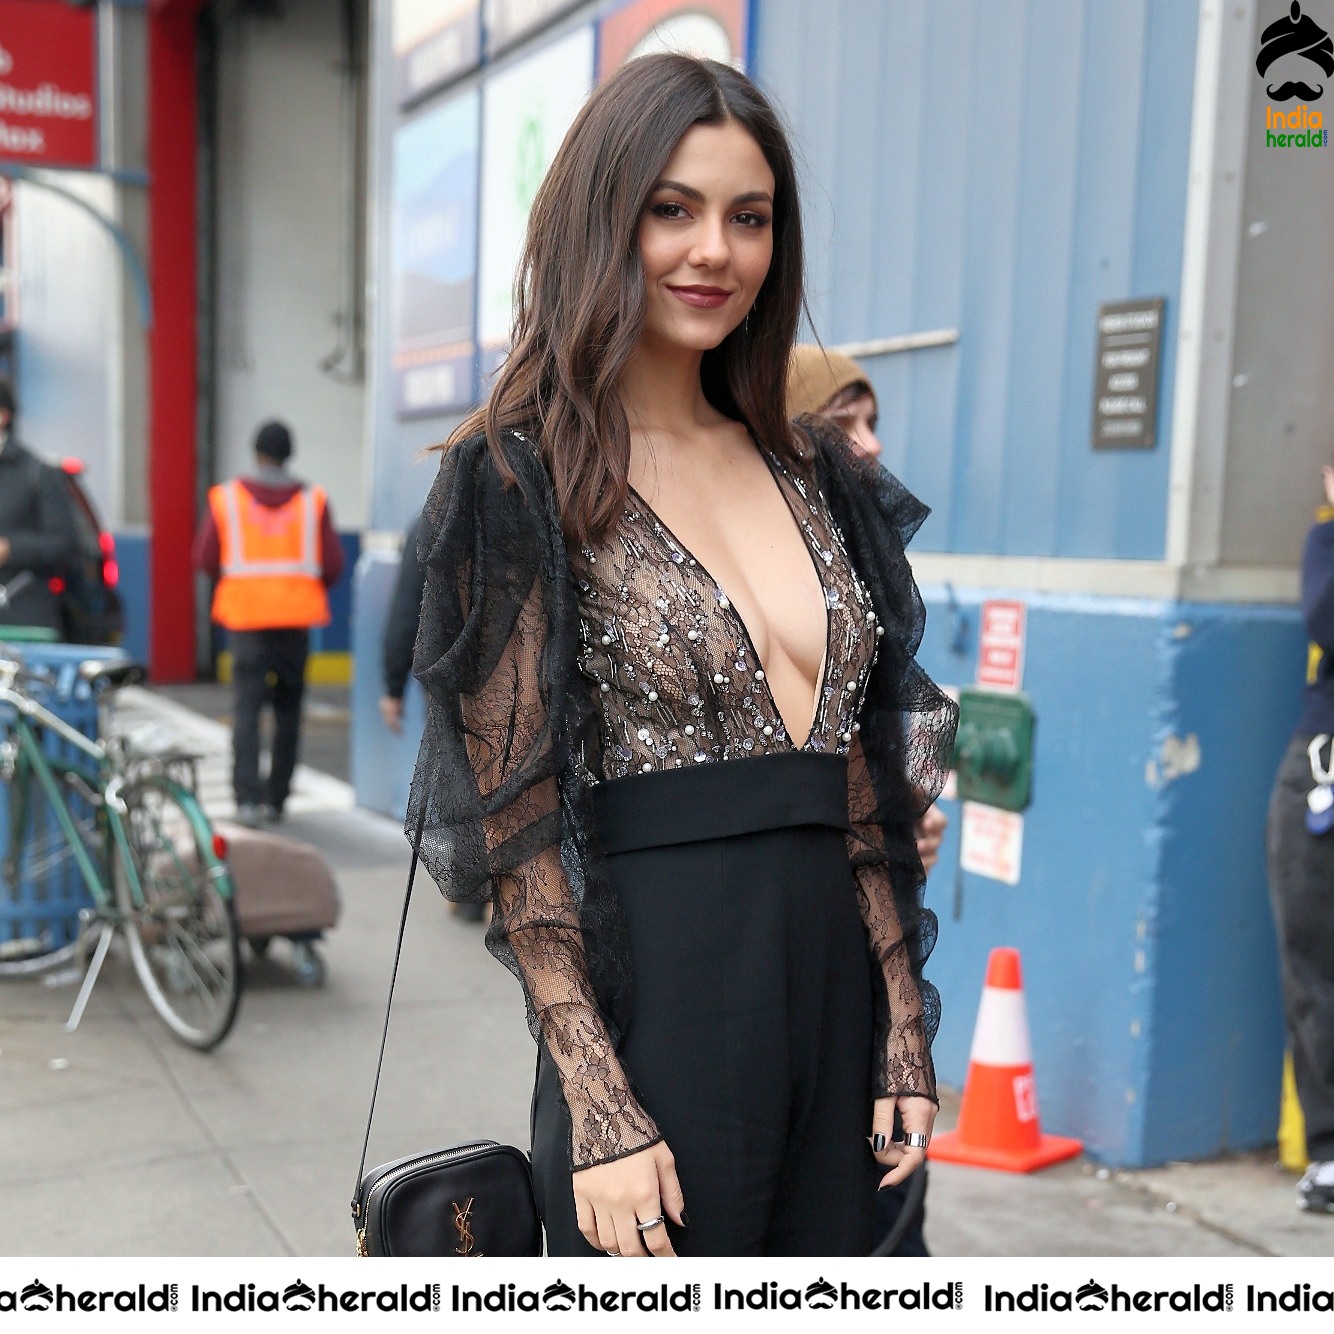 Victoria Justice Arriving At The Pamella Roland Fashion Show in NYC